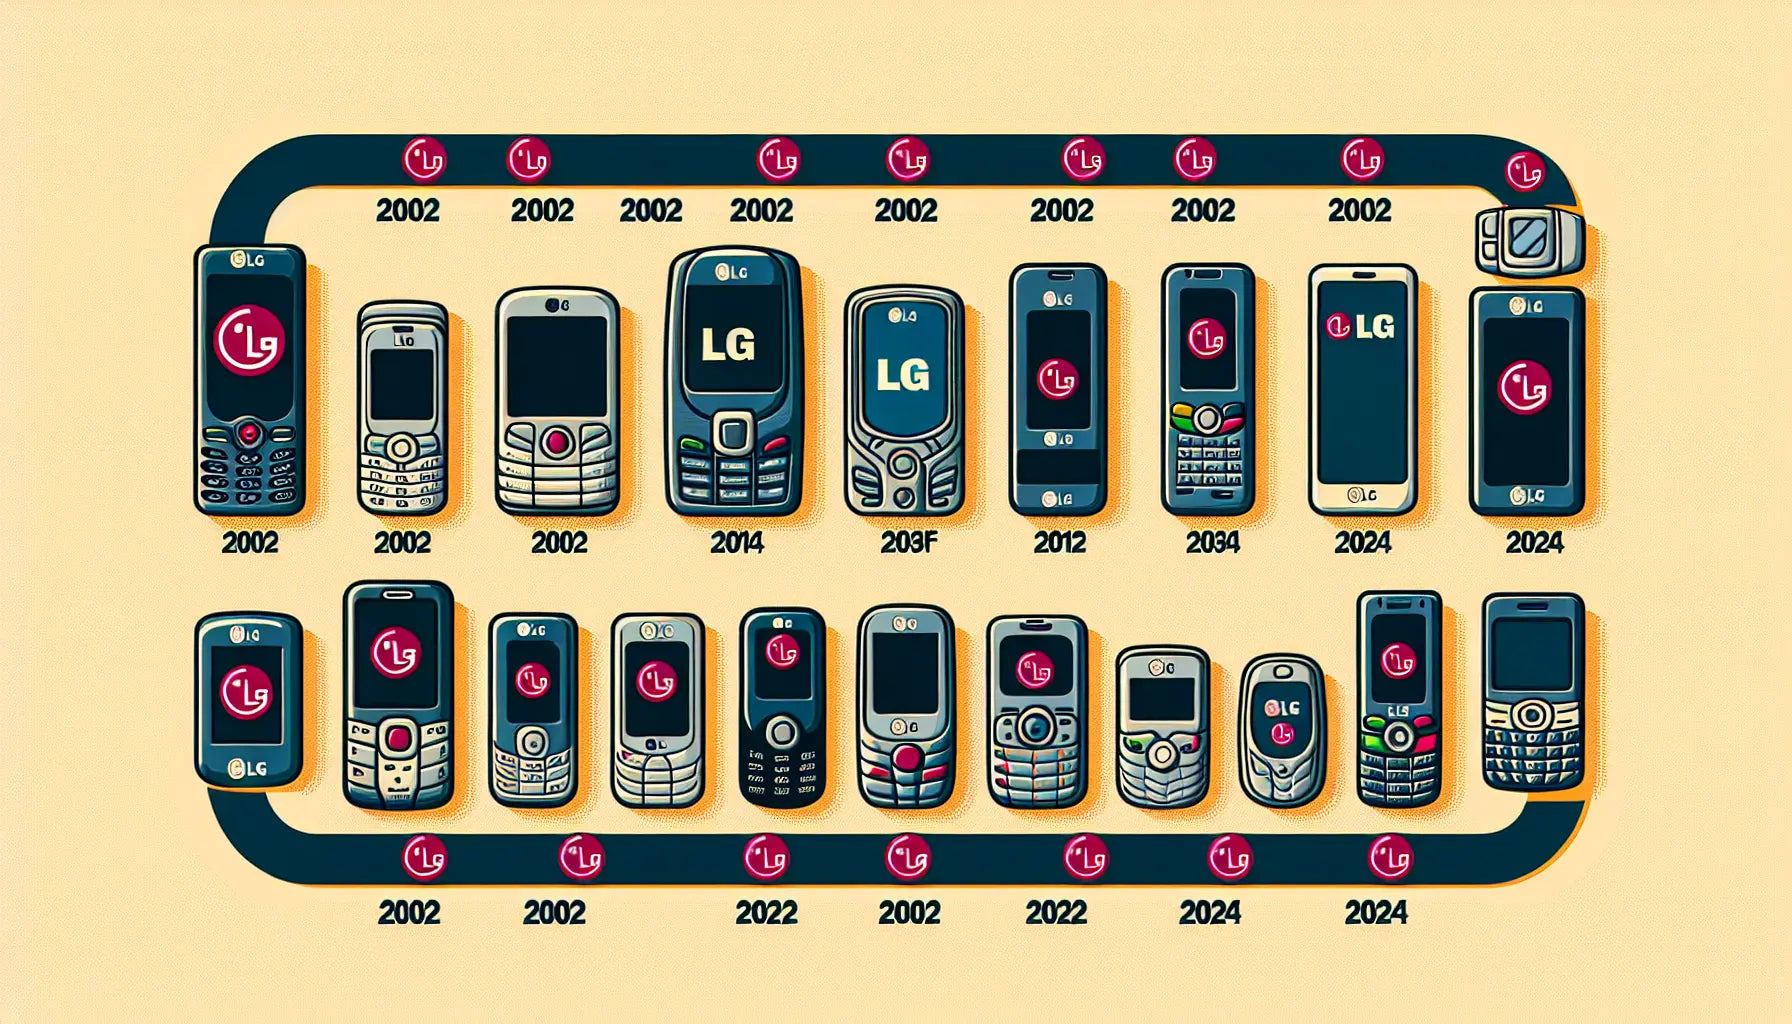 All LG Phones Evolution From 2002-2024